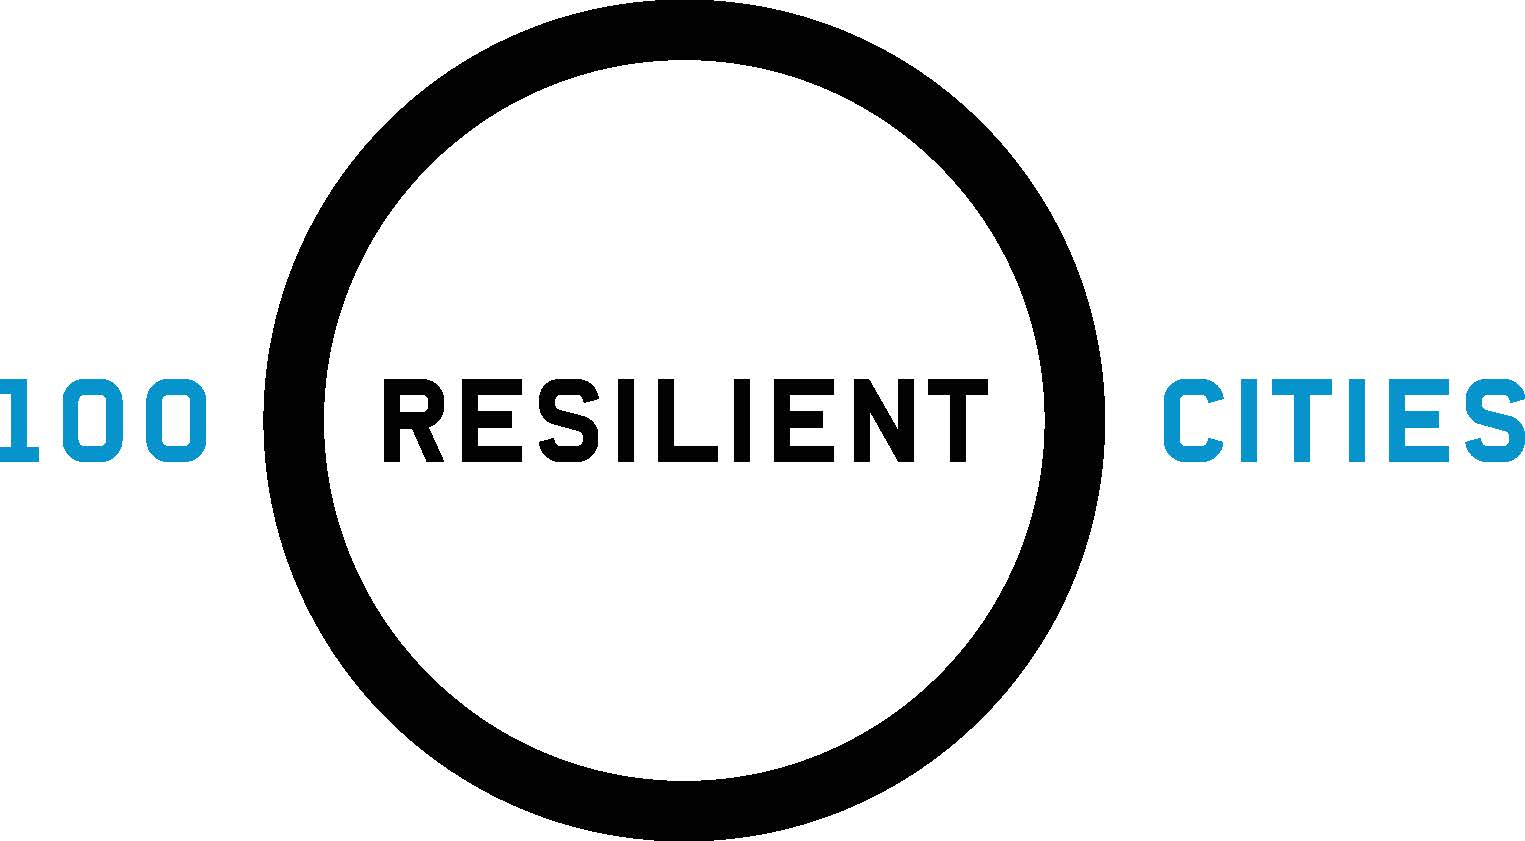 100 Resilient Cities Logo